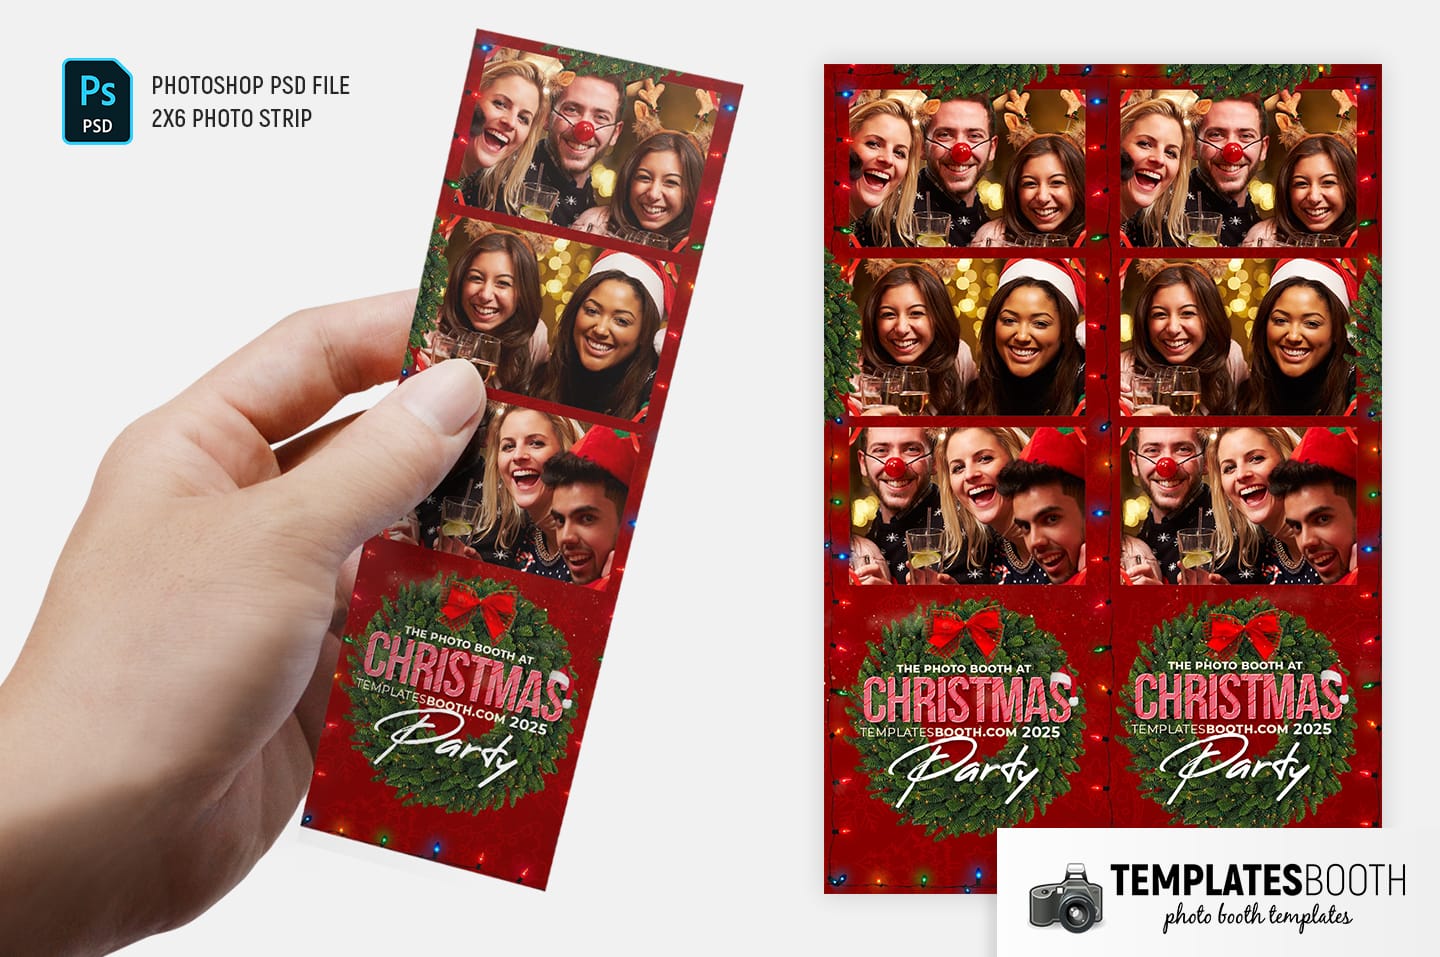 Christmas Party Photo Booth Template (2x6 Photo Strip)